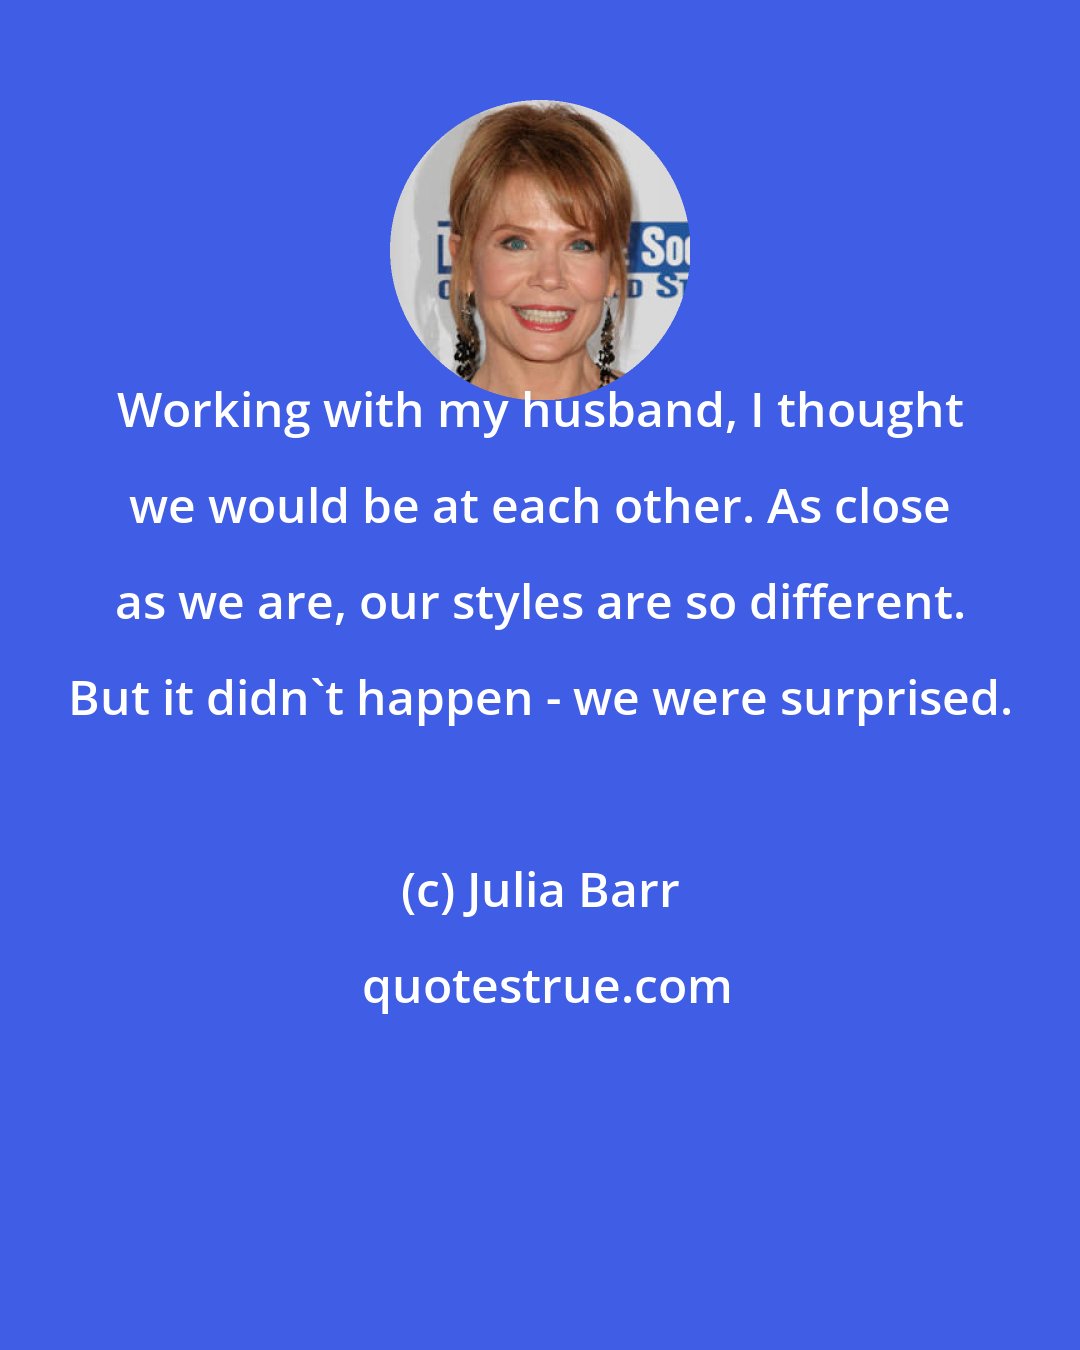 Julia Barr: Working with my husband, I thought we would be at each other. As close as we are, our styles are so different. But it didn't happen - we were surprised.